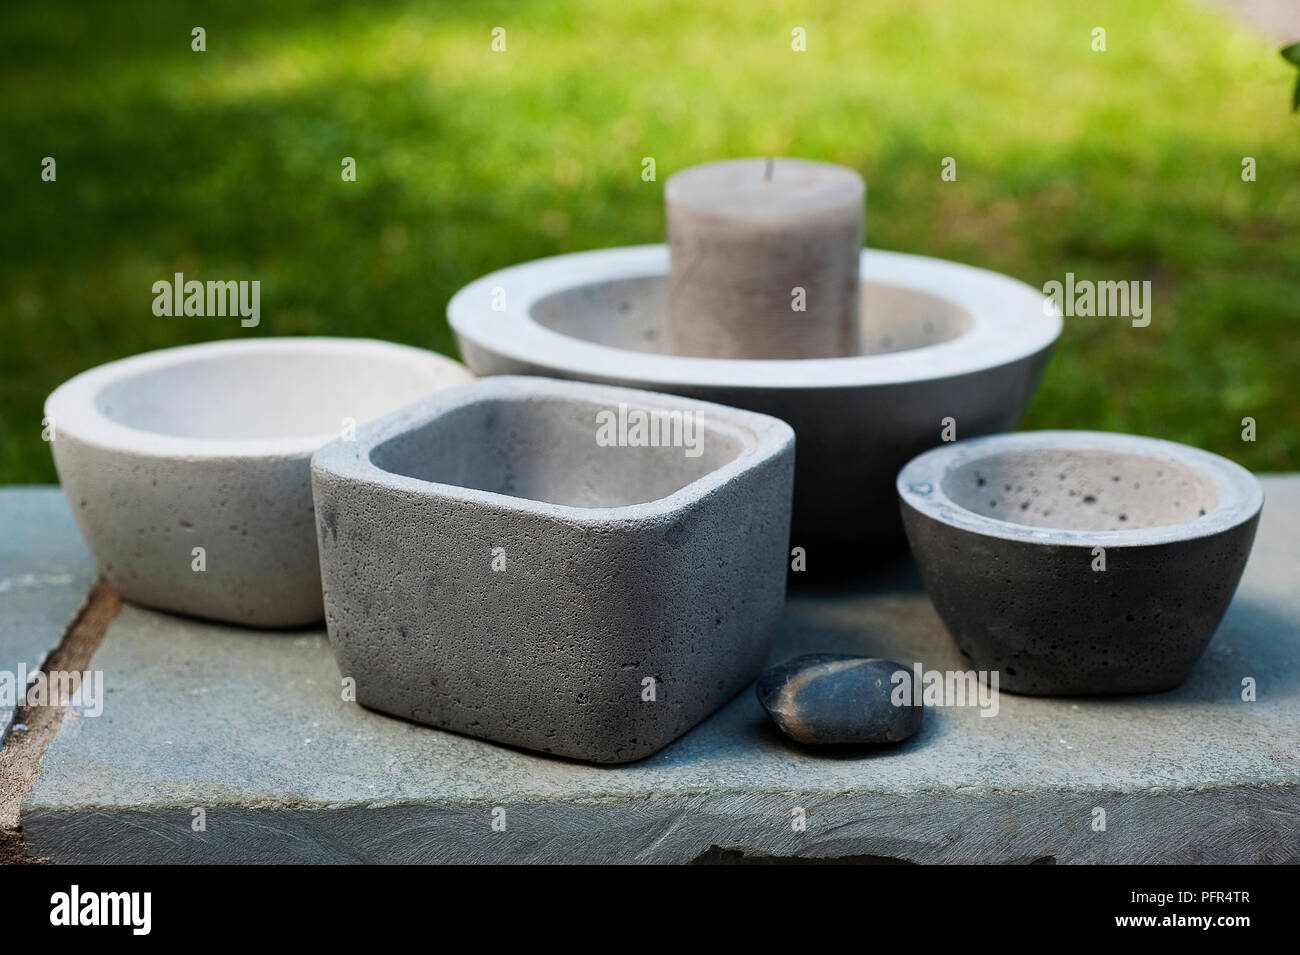 Concrete bowls for candles Stock Photo